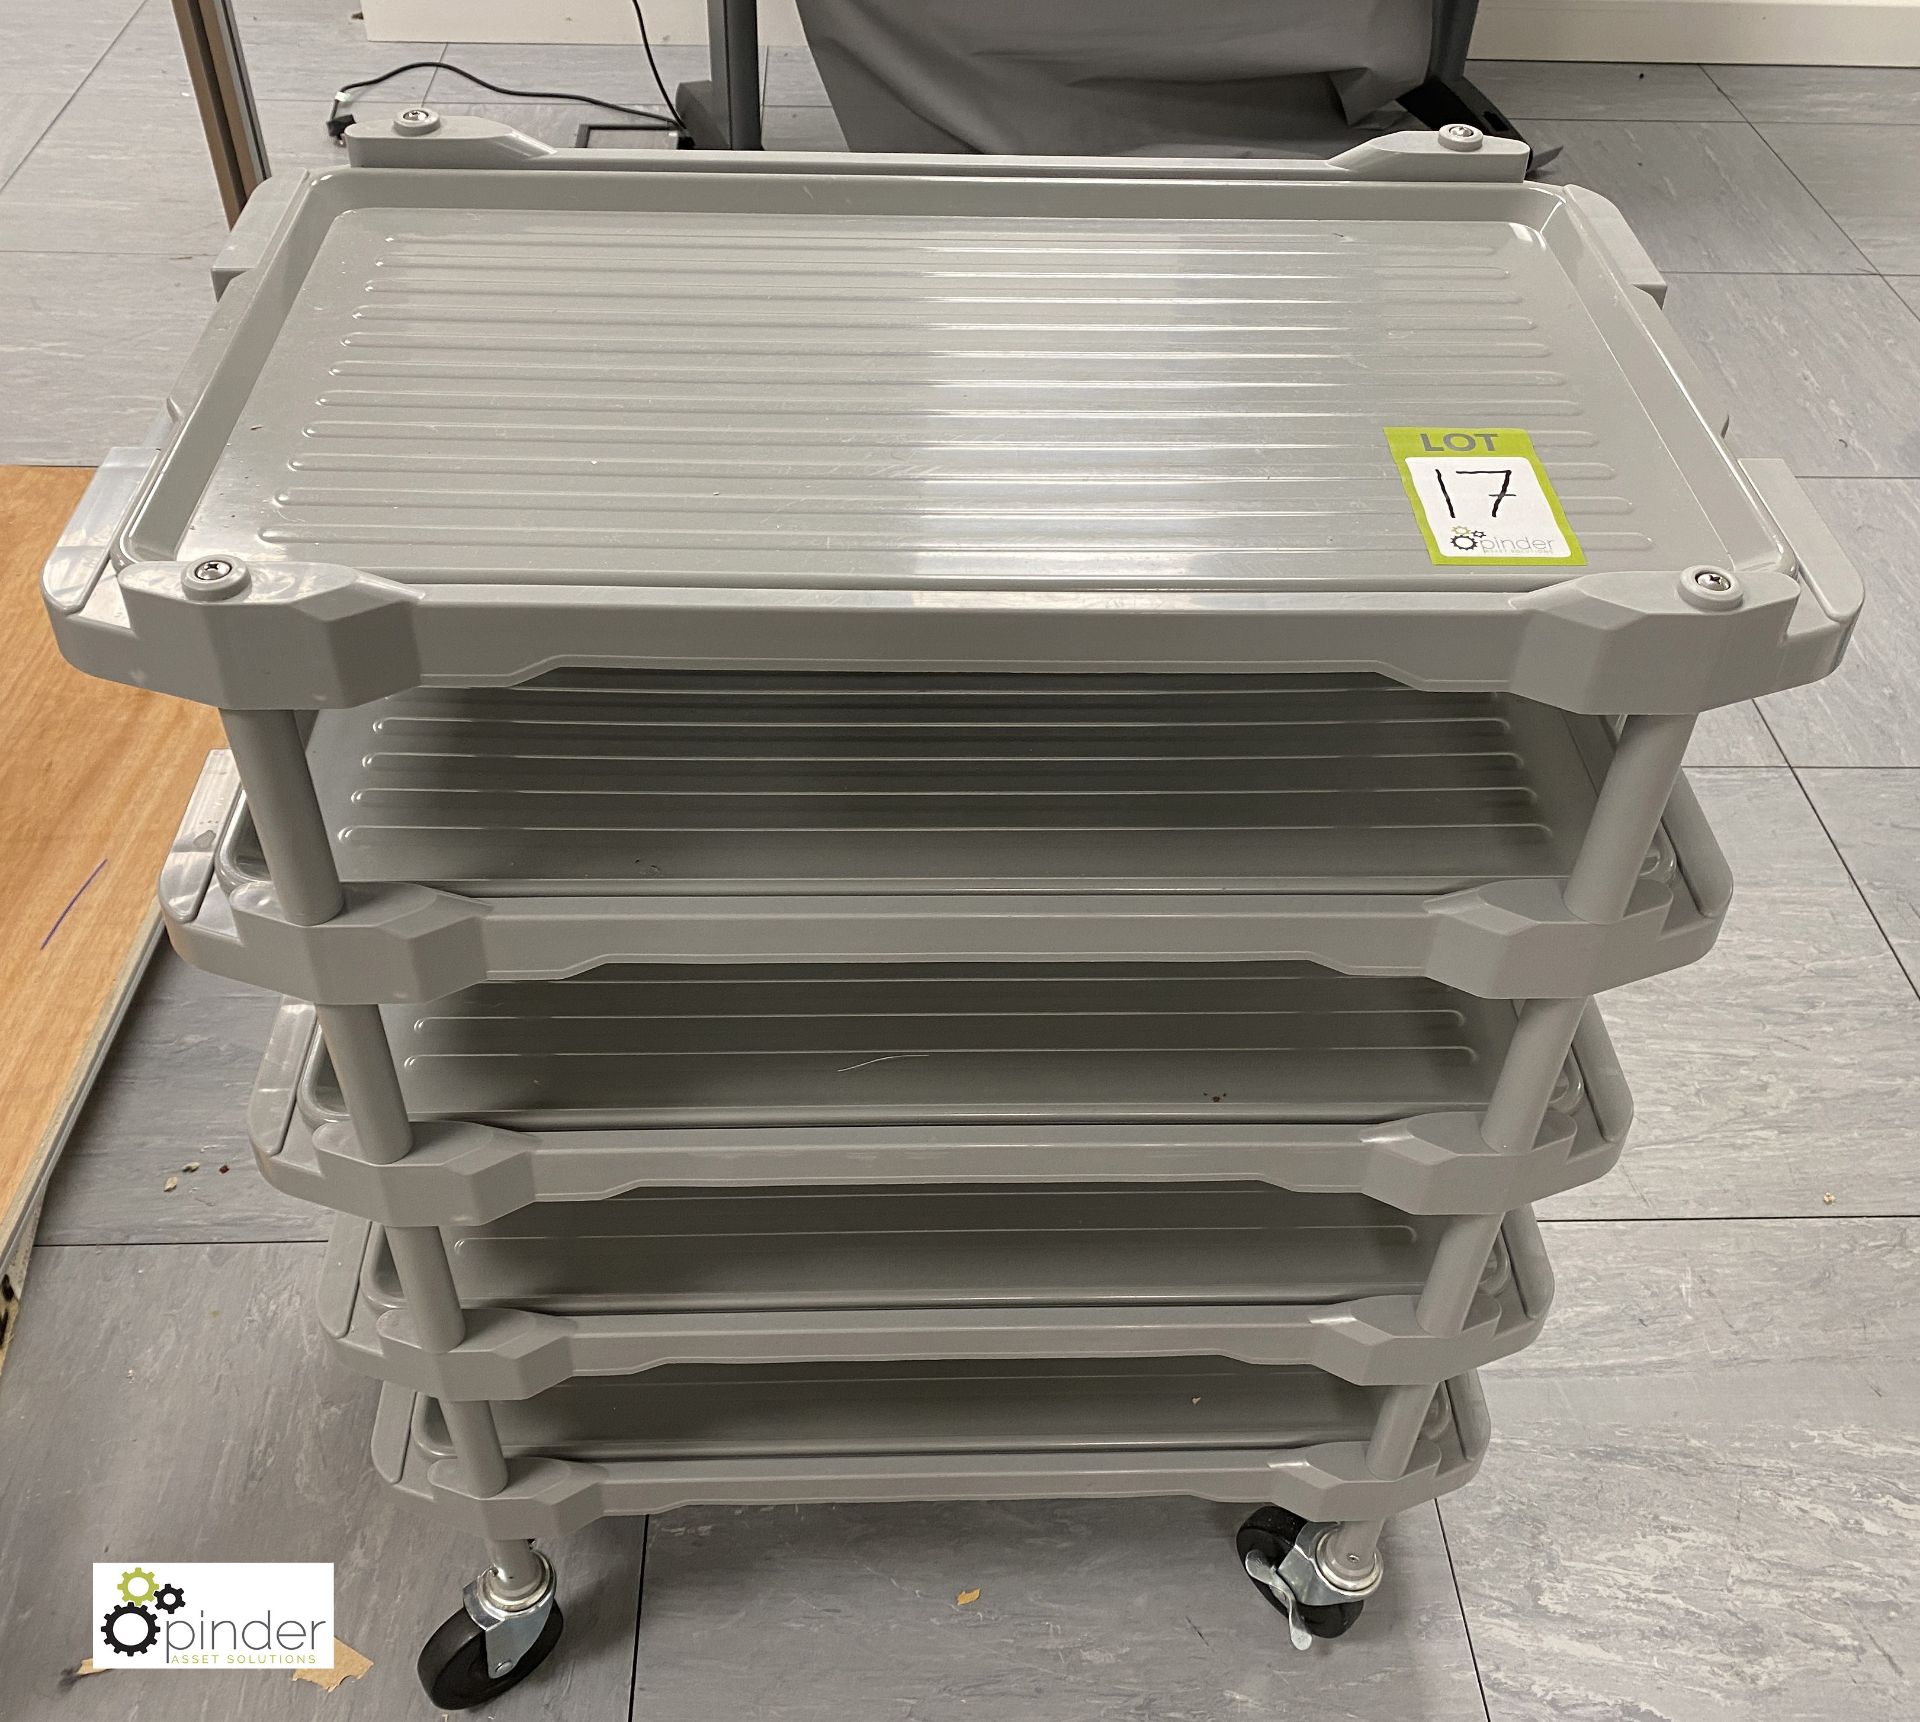 Vogue 5-tray Trolley (LOCATION: Bingley, in office building basement – COLLECTION: Monday 22 - Image 2 of 3